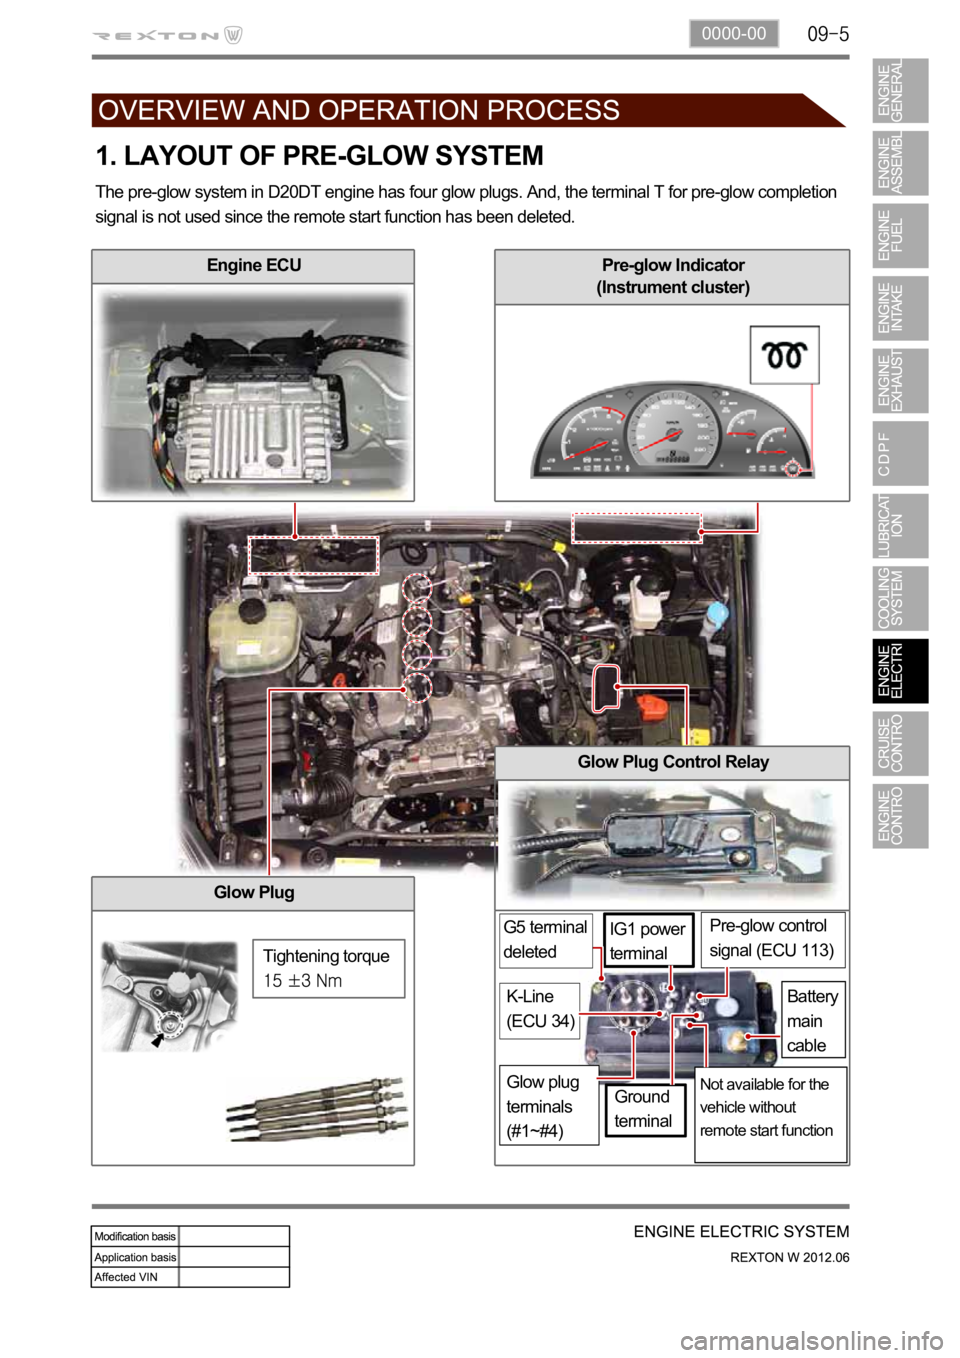 SSANGYONG NEW REXTON 2012  Service Manual 0000-00
Glow Plug
1. LAYOUT OF PRE-GLOW SYSTEM
The pre-glow system in D20DT engine has four glow plugs. And, the terminal T for pre-glow completion 
signal is not used since the remote start function 